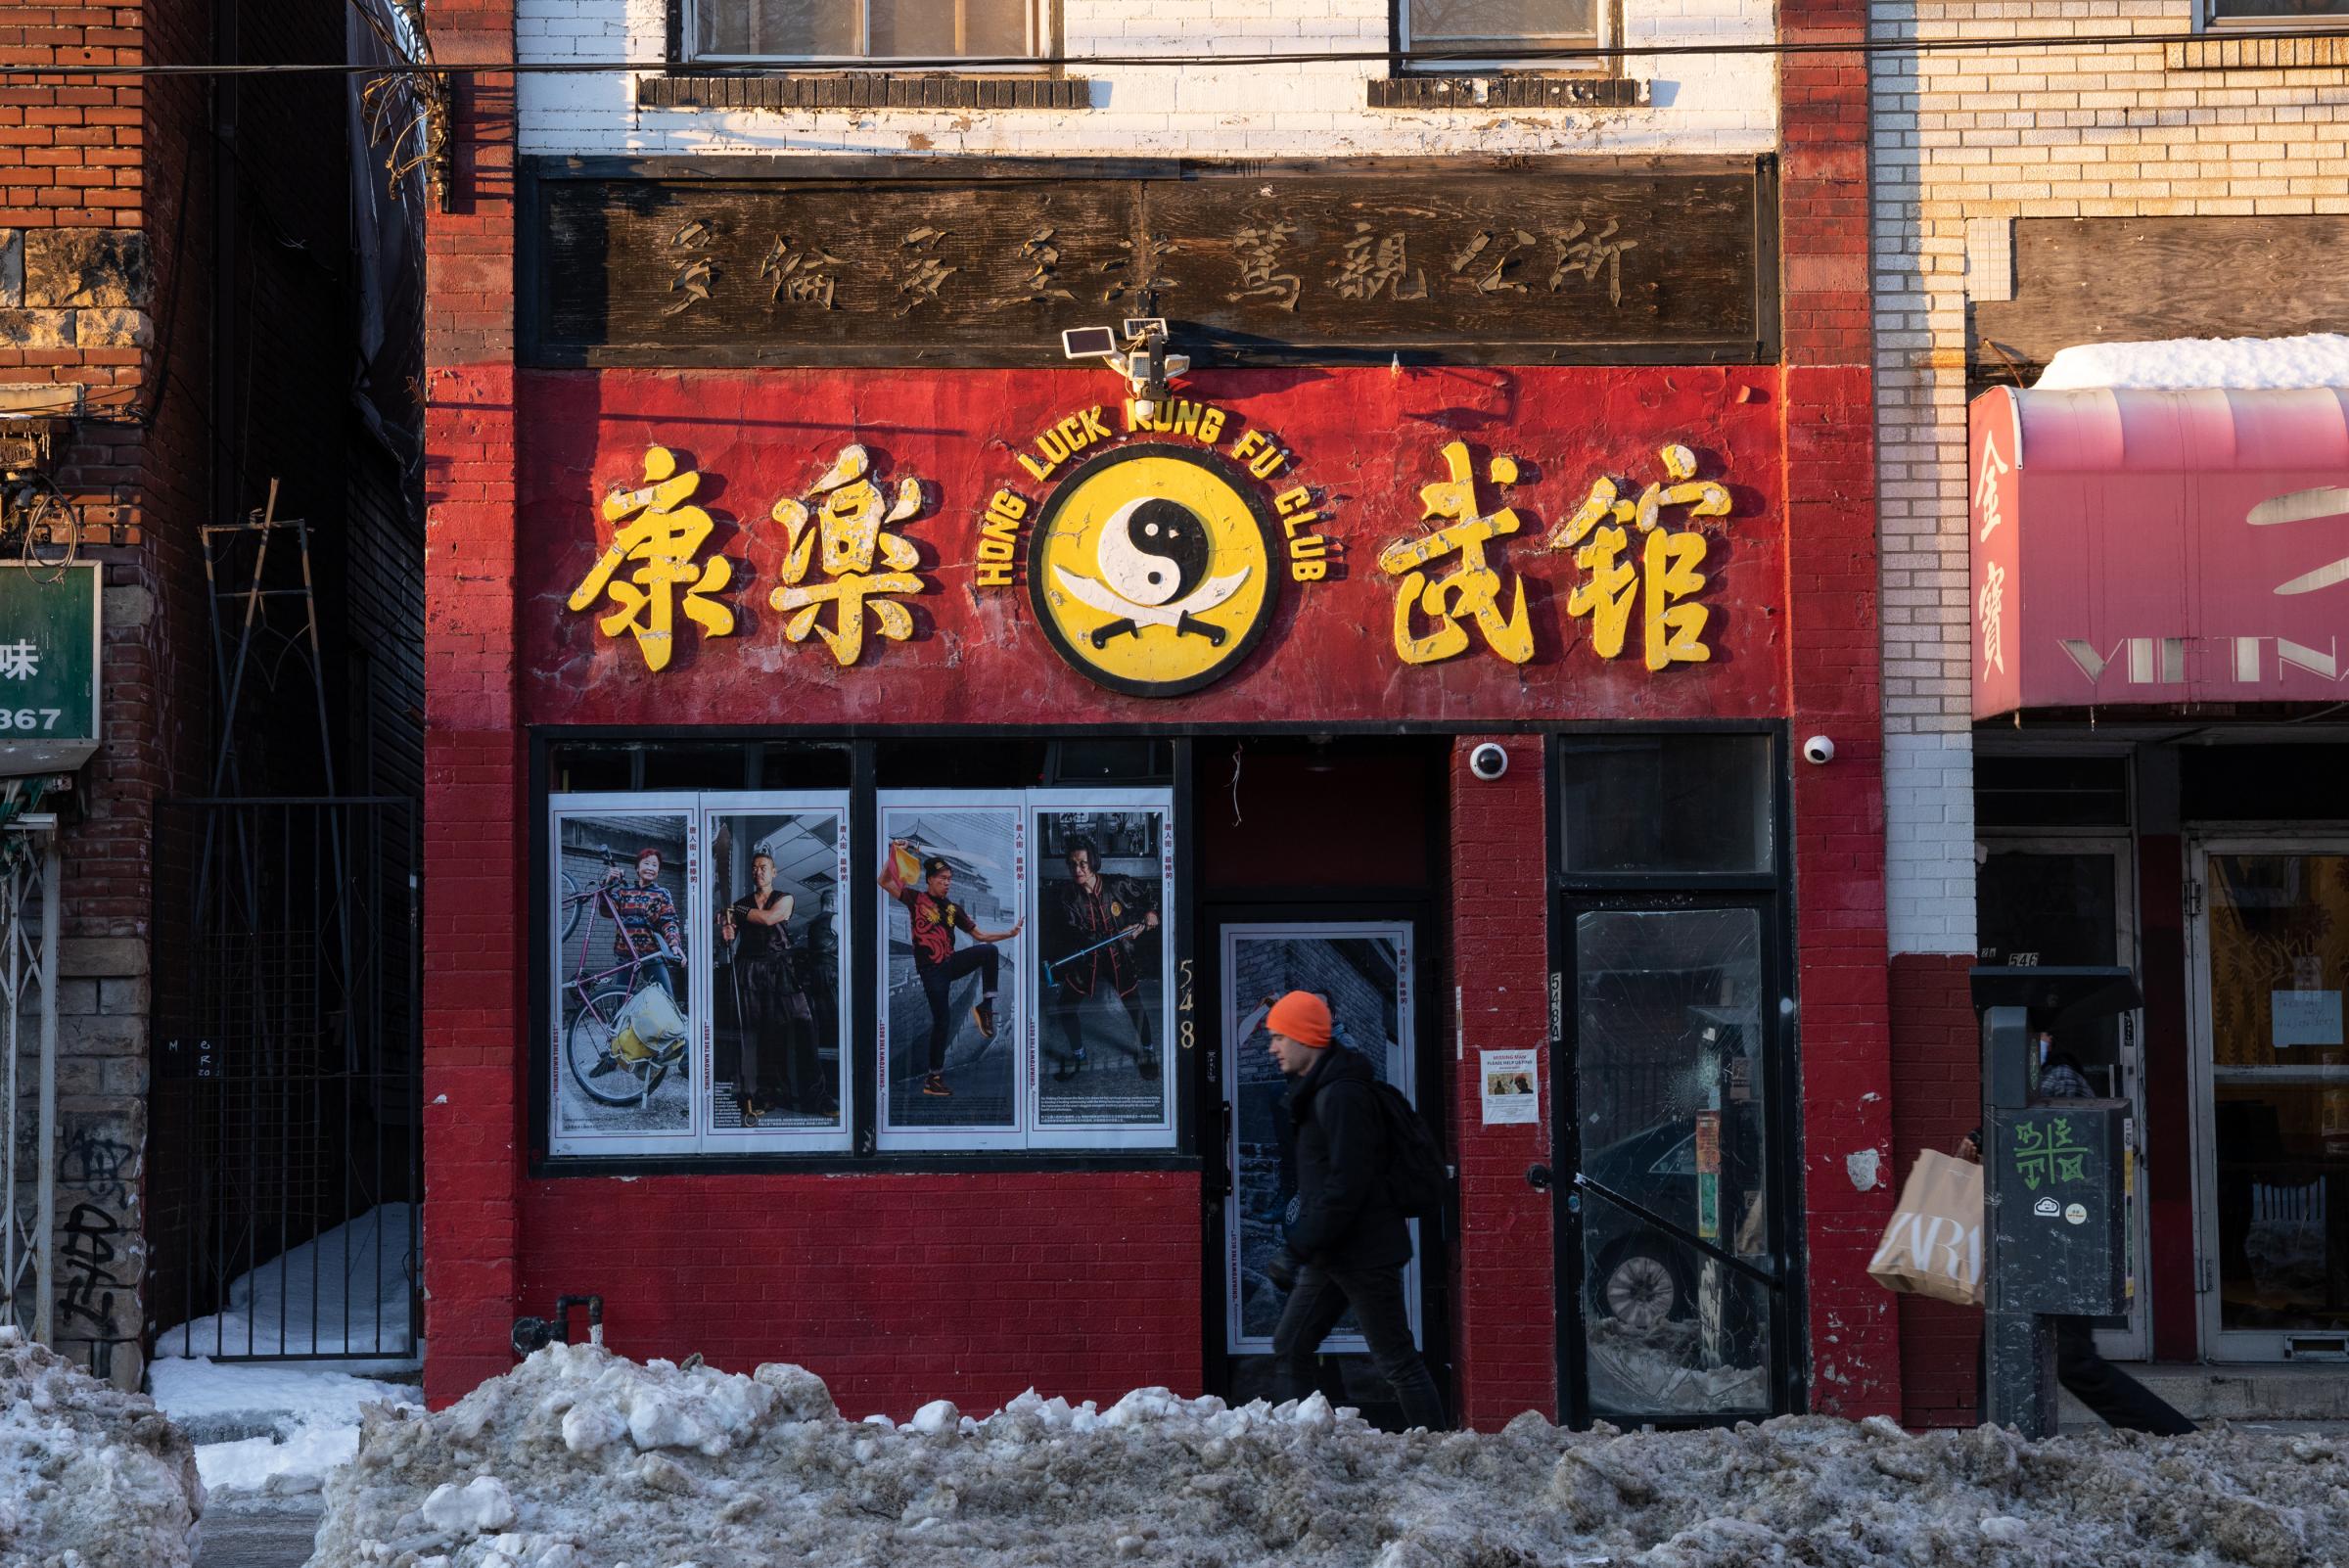 A person walks by the Hong Luck Kung Fu Club on the edge of Toronto’s Chinatown on January 20, 2022. Portraits from the ‘Best of Chinatown’ window...